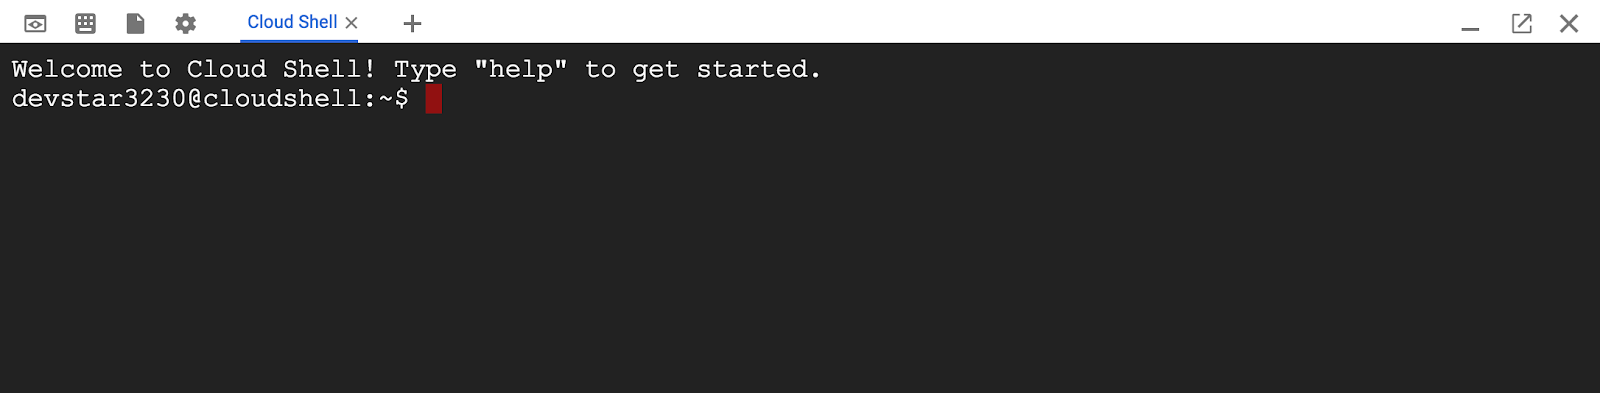 Cloud Shell showing command-line prompt.